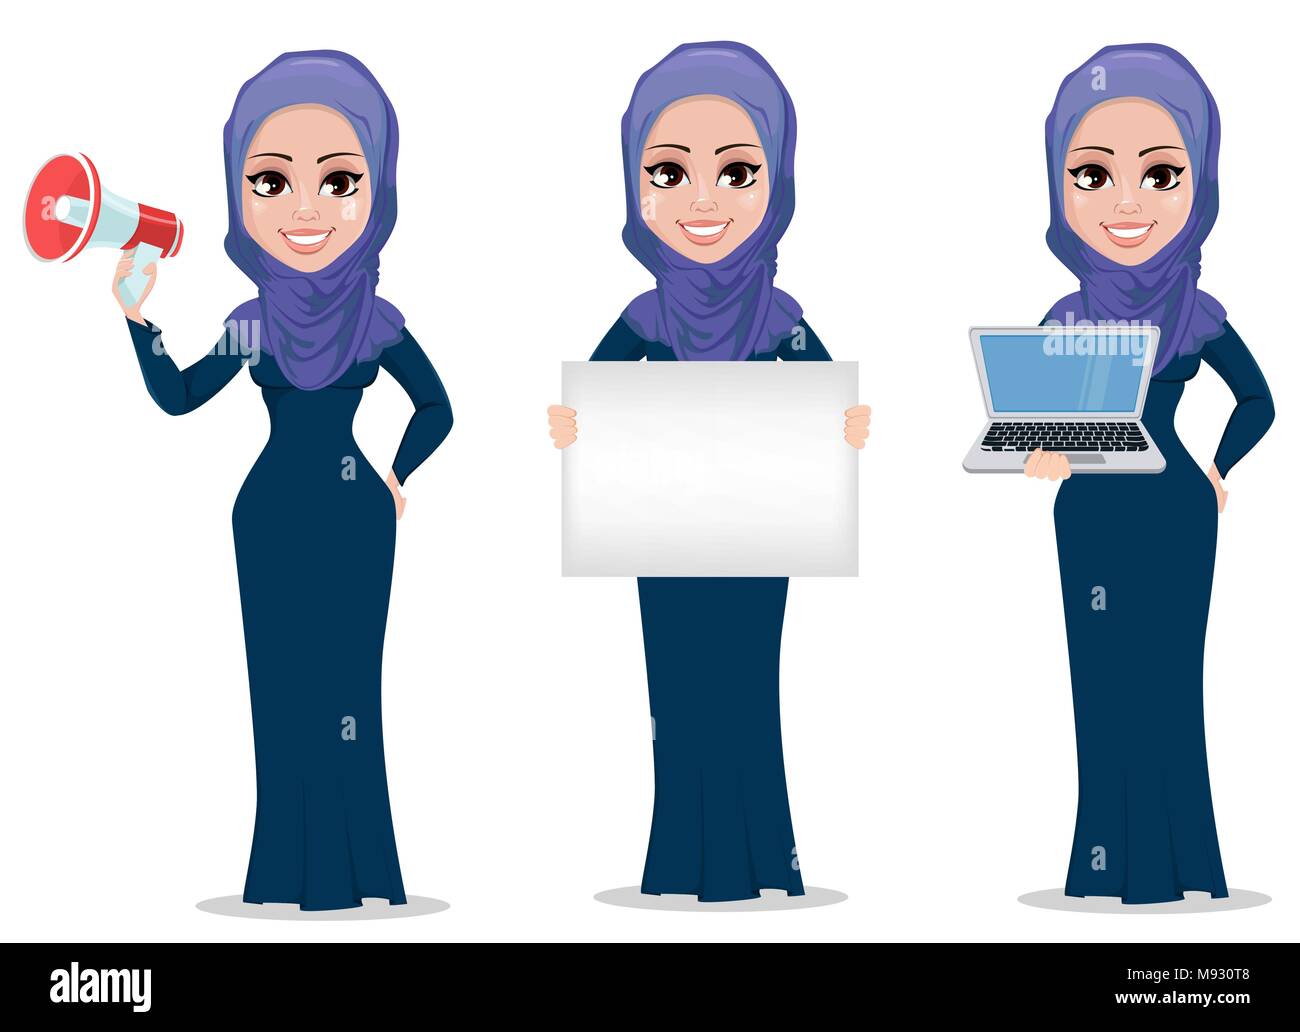 Arabic business woman cartoon character set. Young Muslim businesswoman in casual clothes holds loudspeaker, holds placard and holds laptop. Vector il Stock Vector